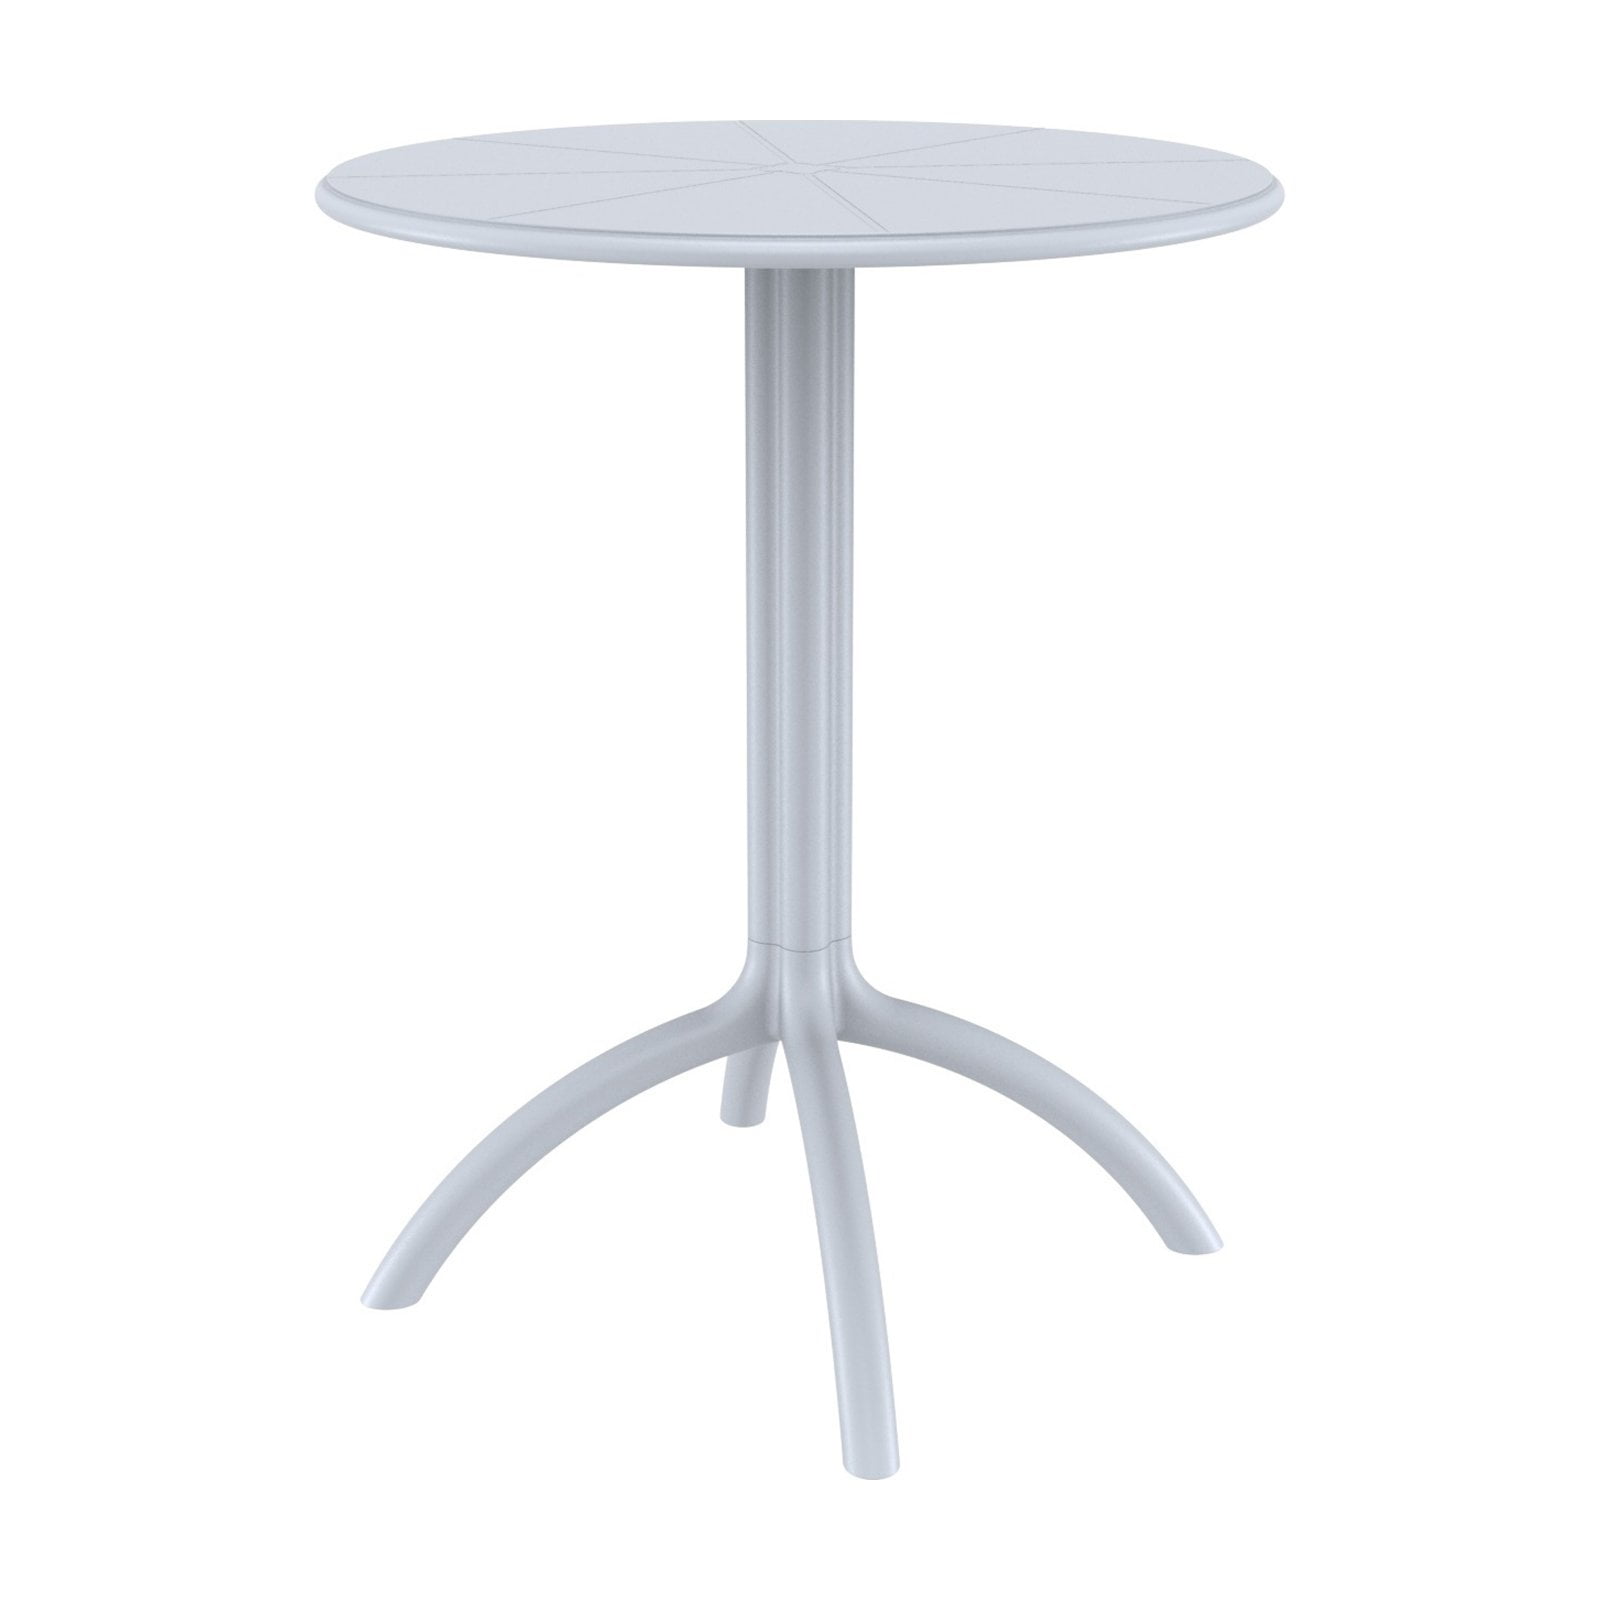 Isp160-sil Octopus Round Bistro Table, Silver Gray